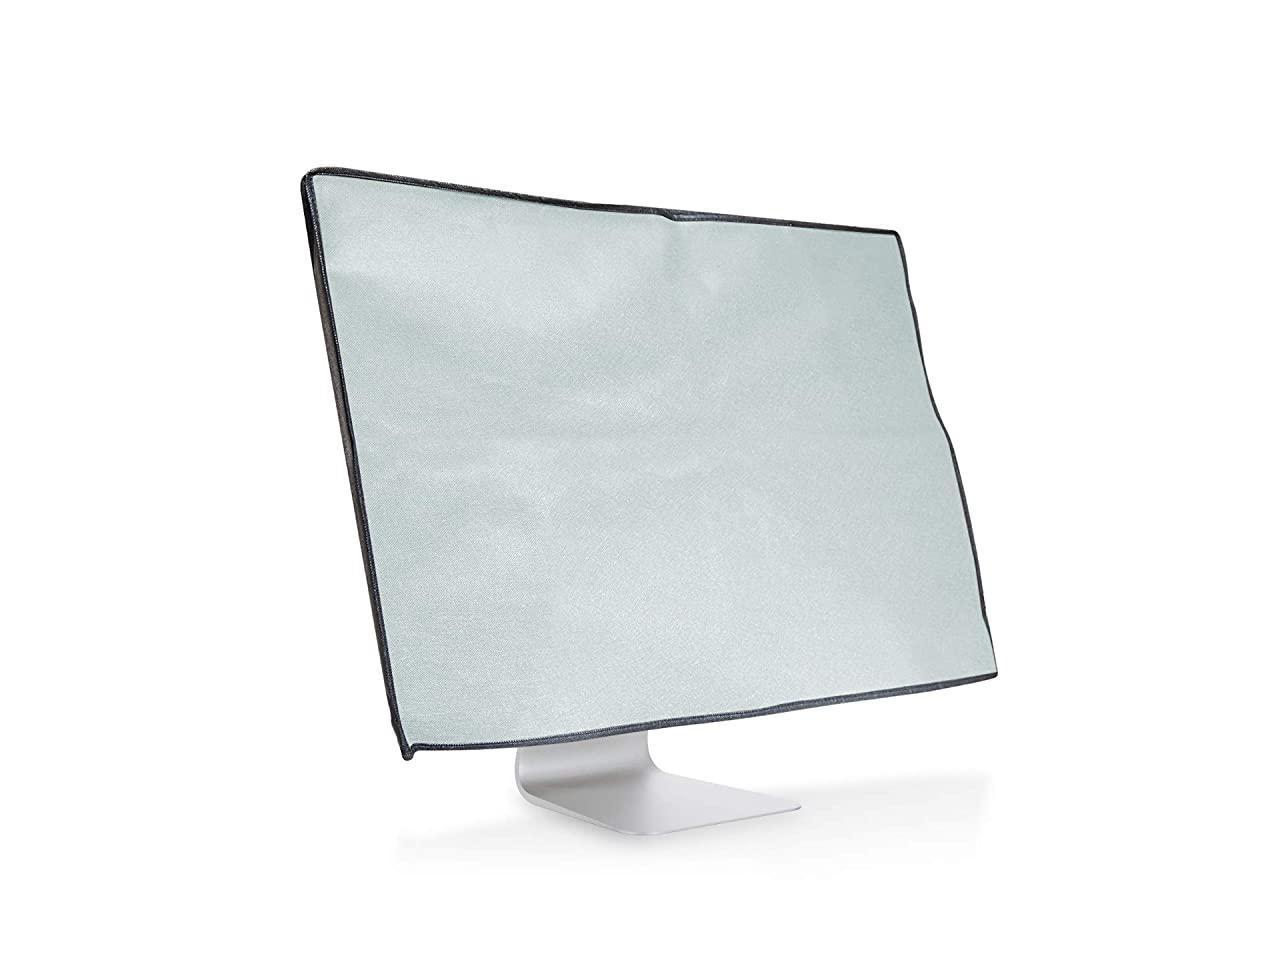 Dust Cover PC Monitor Case Screen Display Protector Black/Light Grey kwmobile Monitor Cover for 31-32 Monitor 